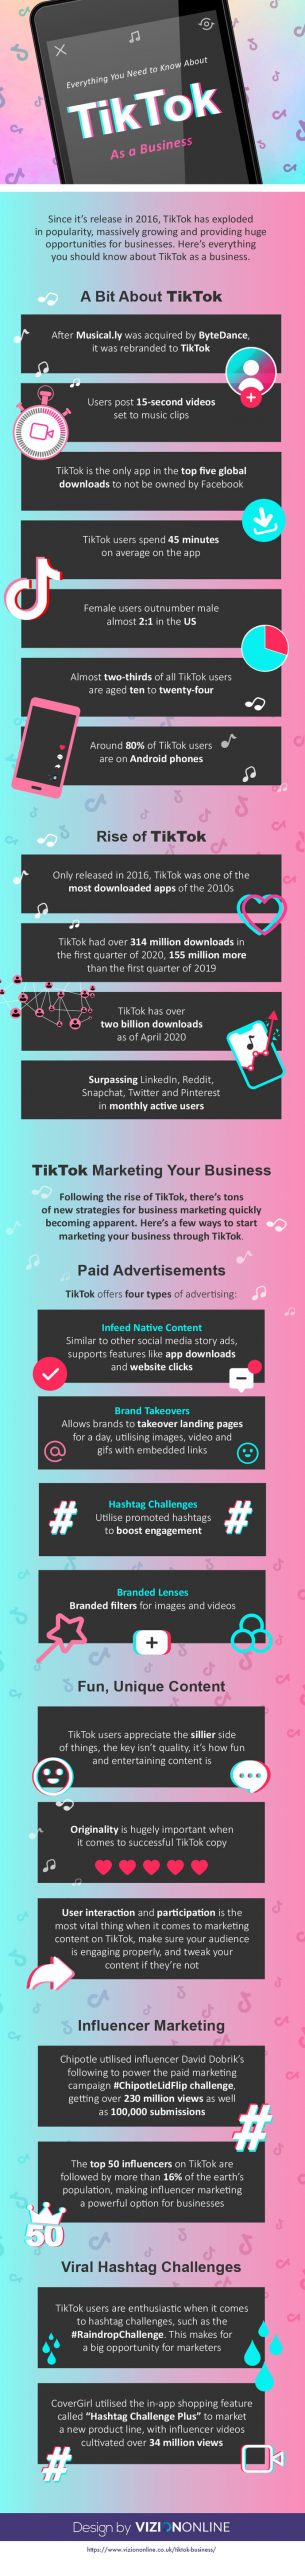 information about Tiktok as a business